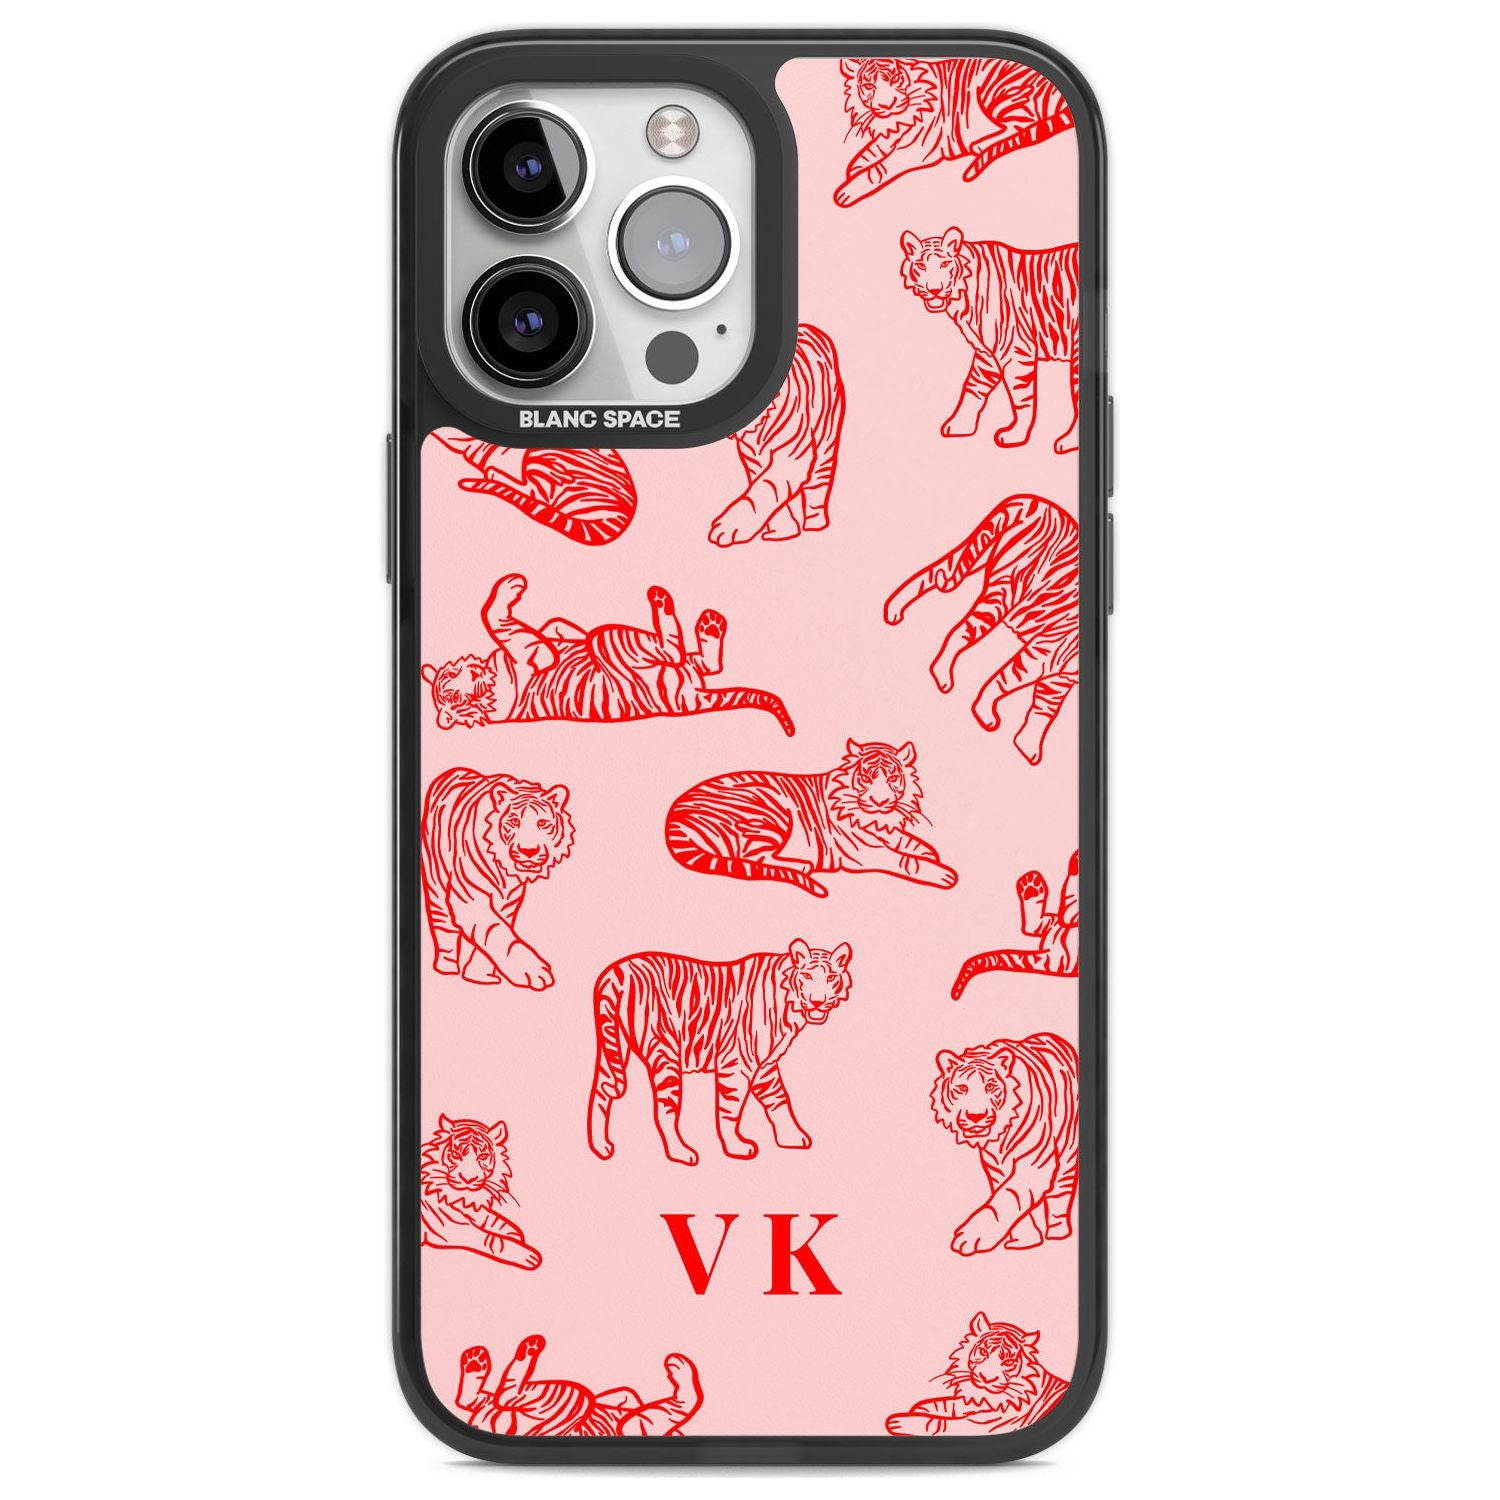 Personalised Red Tiger Outlines on Pink Custom Phone Case iPhone 13 Pro Max / Black Impact Case,iPhone 14 Pro Max / Black Impact Case Blanc Space